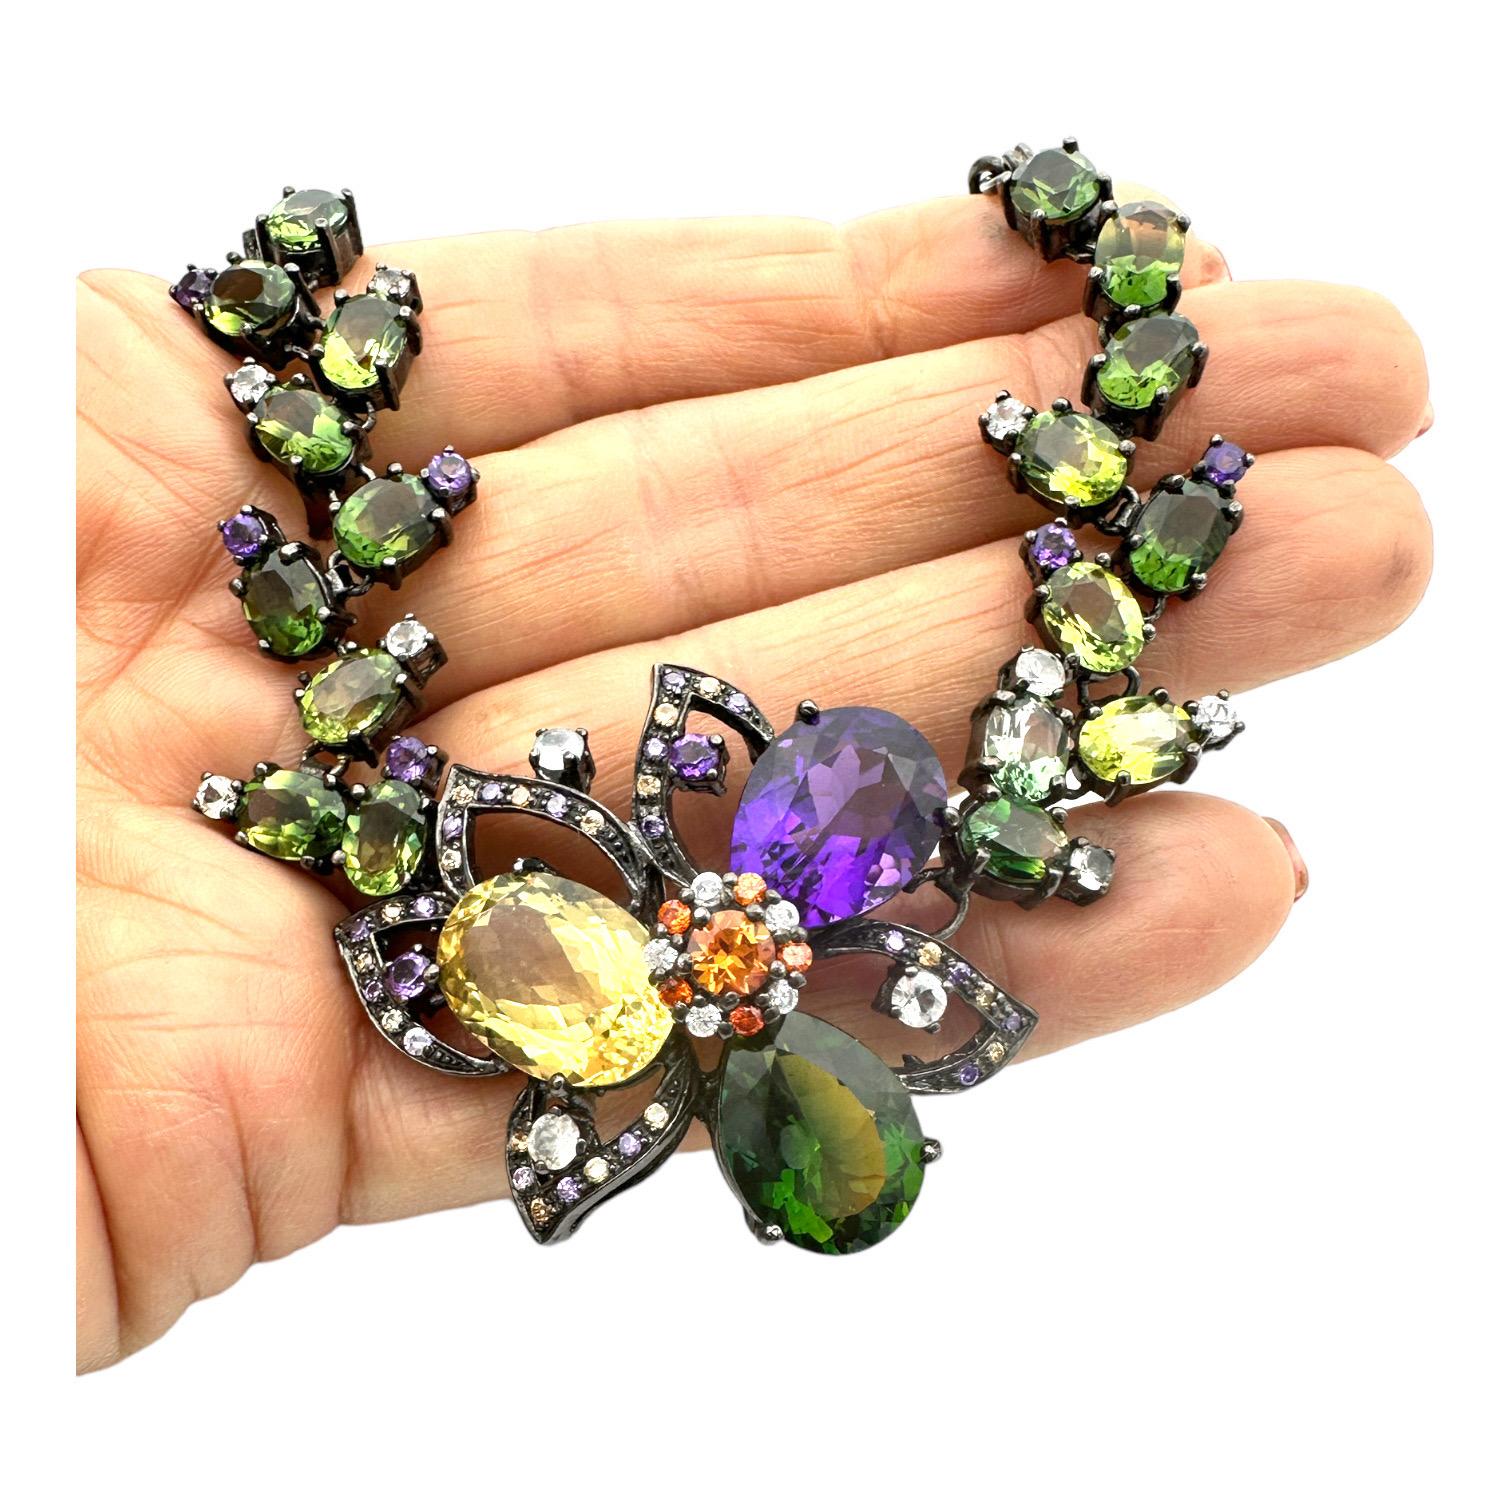 75 Carat Colored Gemstone Necklace Black Sterling Silver White Sapphire Necklace For Sale 2